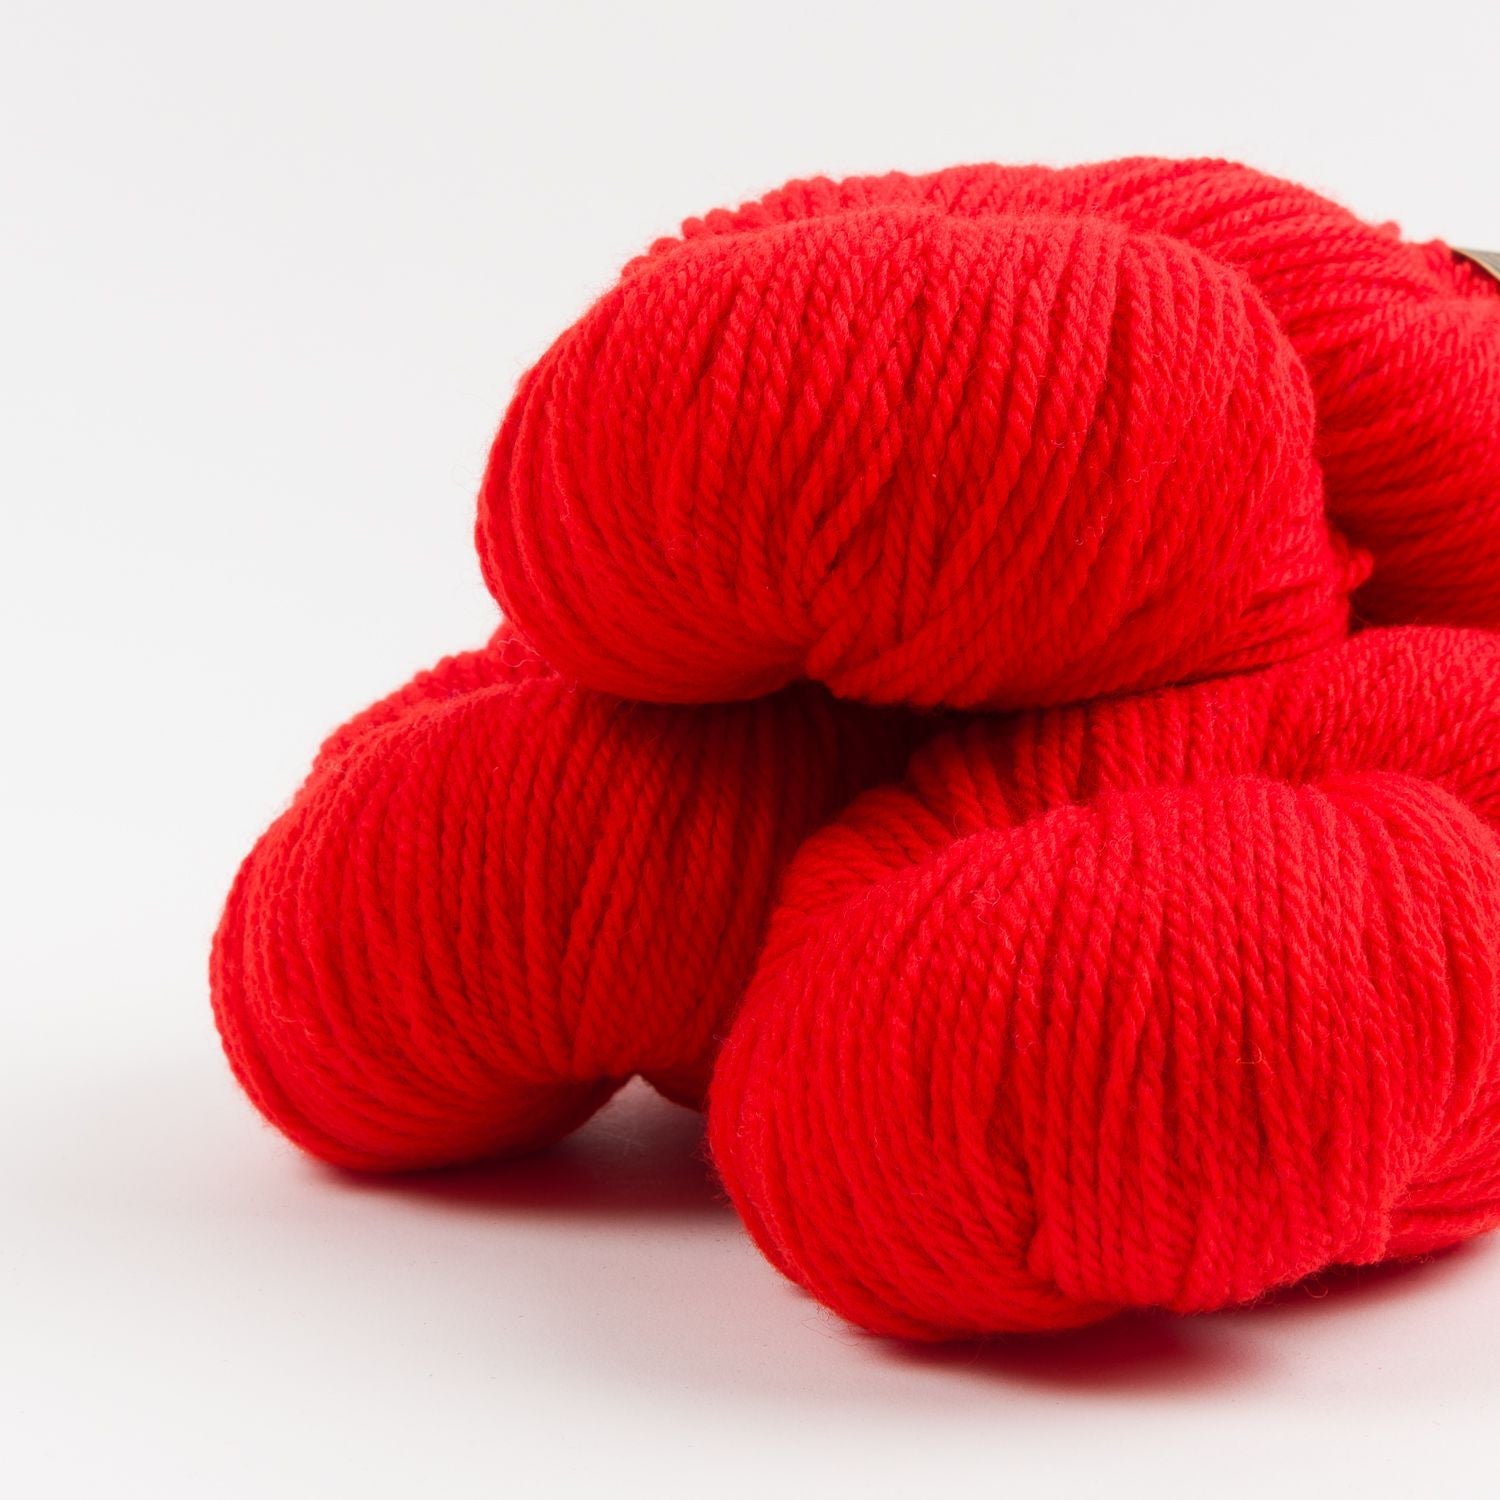 WESTKNITS KIT - RED HOT (FOUR SKEINS)